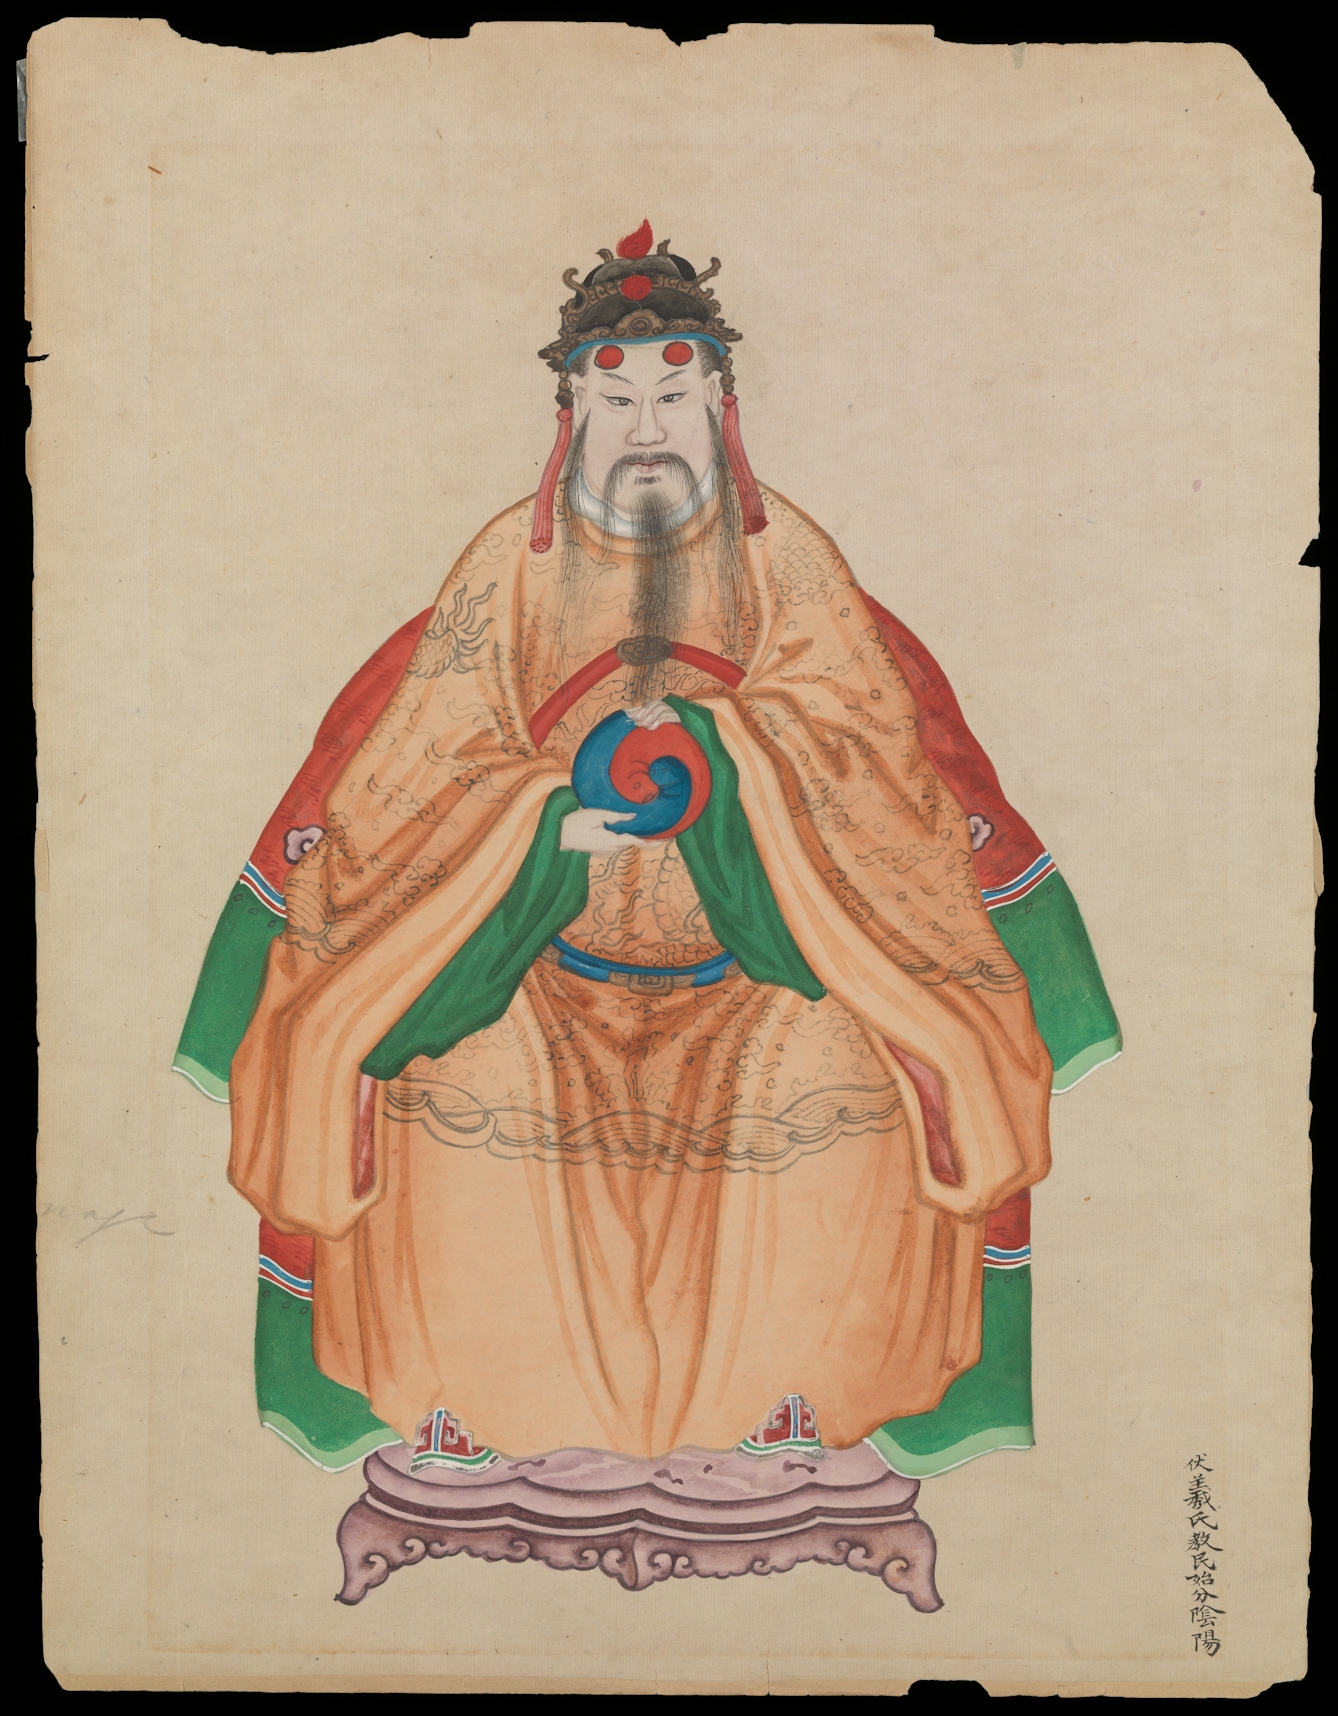 Painting of Chinese Emperor Fu Hsi, wearing traditional costume, holding the 'Yin-yang' symbol with feet resting on a cloud-shaped stool.